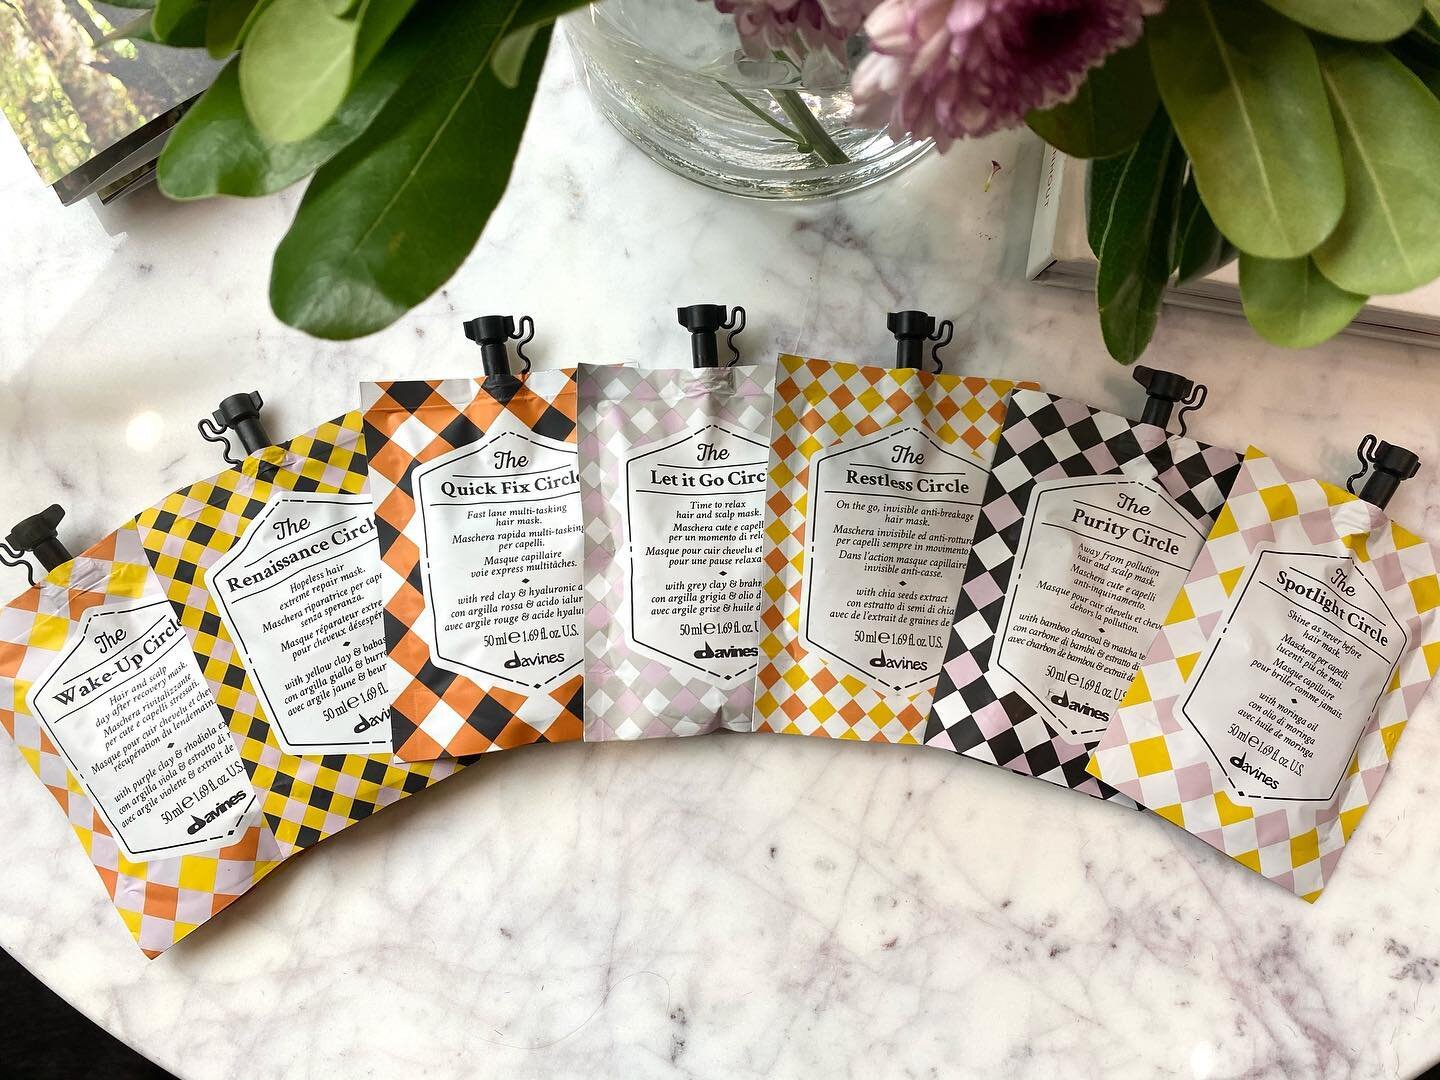 Have you seen the Davines Circle Chronicles? ✨
.
There are 7 different types of hair masks for every occasion. From deep nourishment to added shine, these cover every need. In just 10 minutes, these hair masks deliver fast and targeted results!
.
Eac